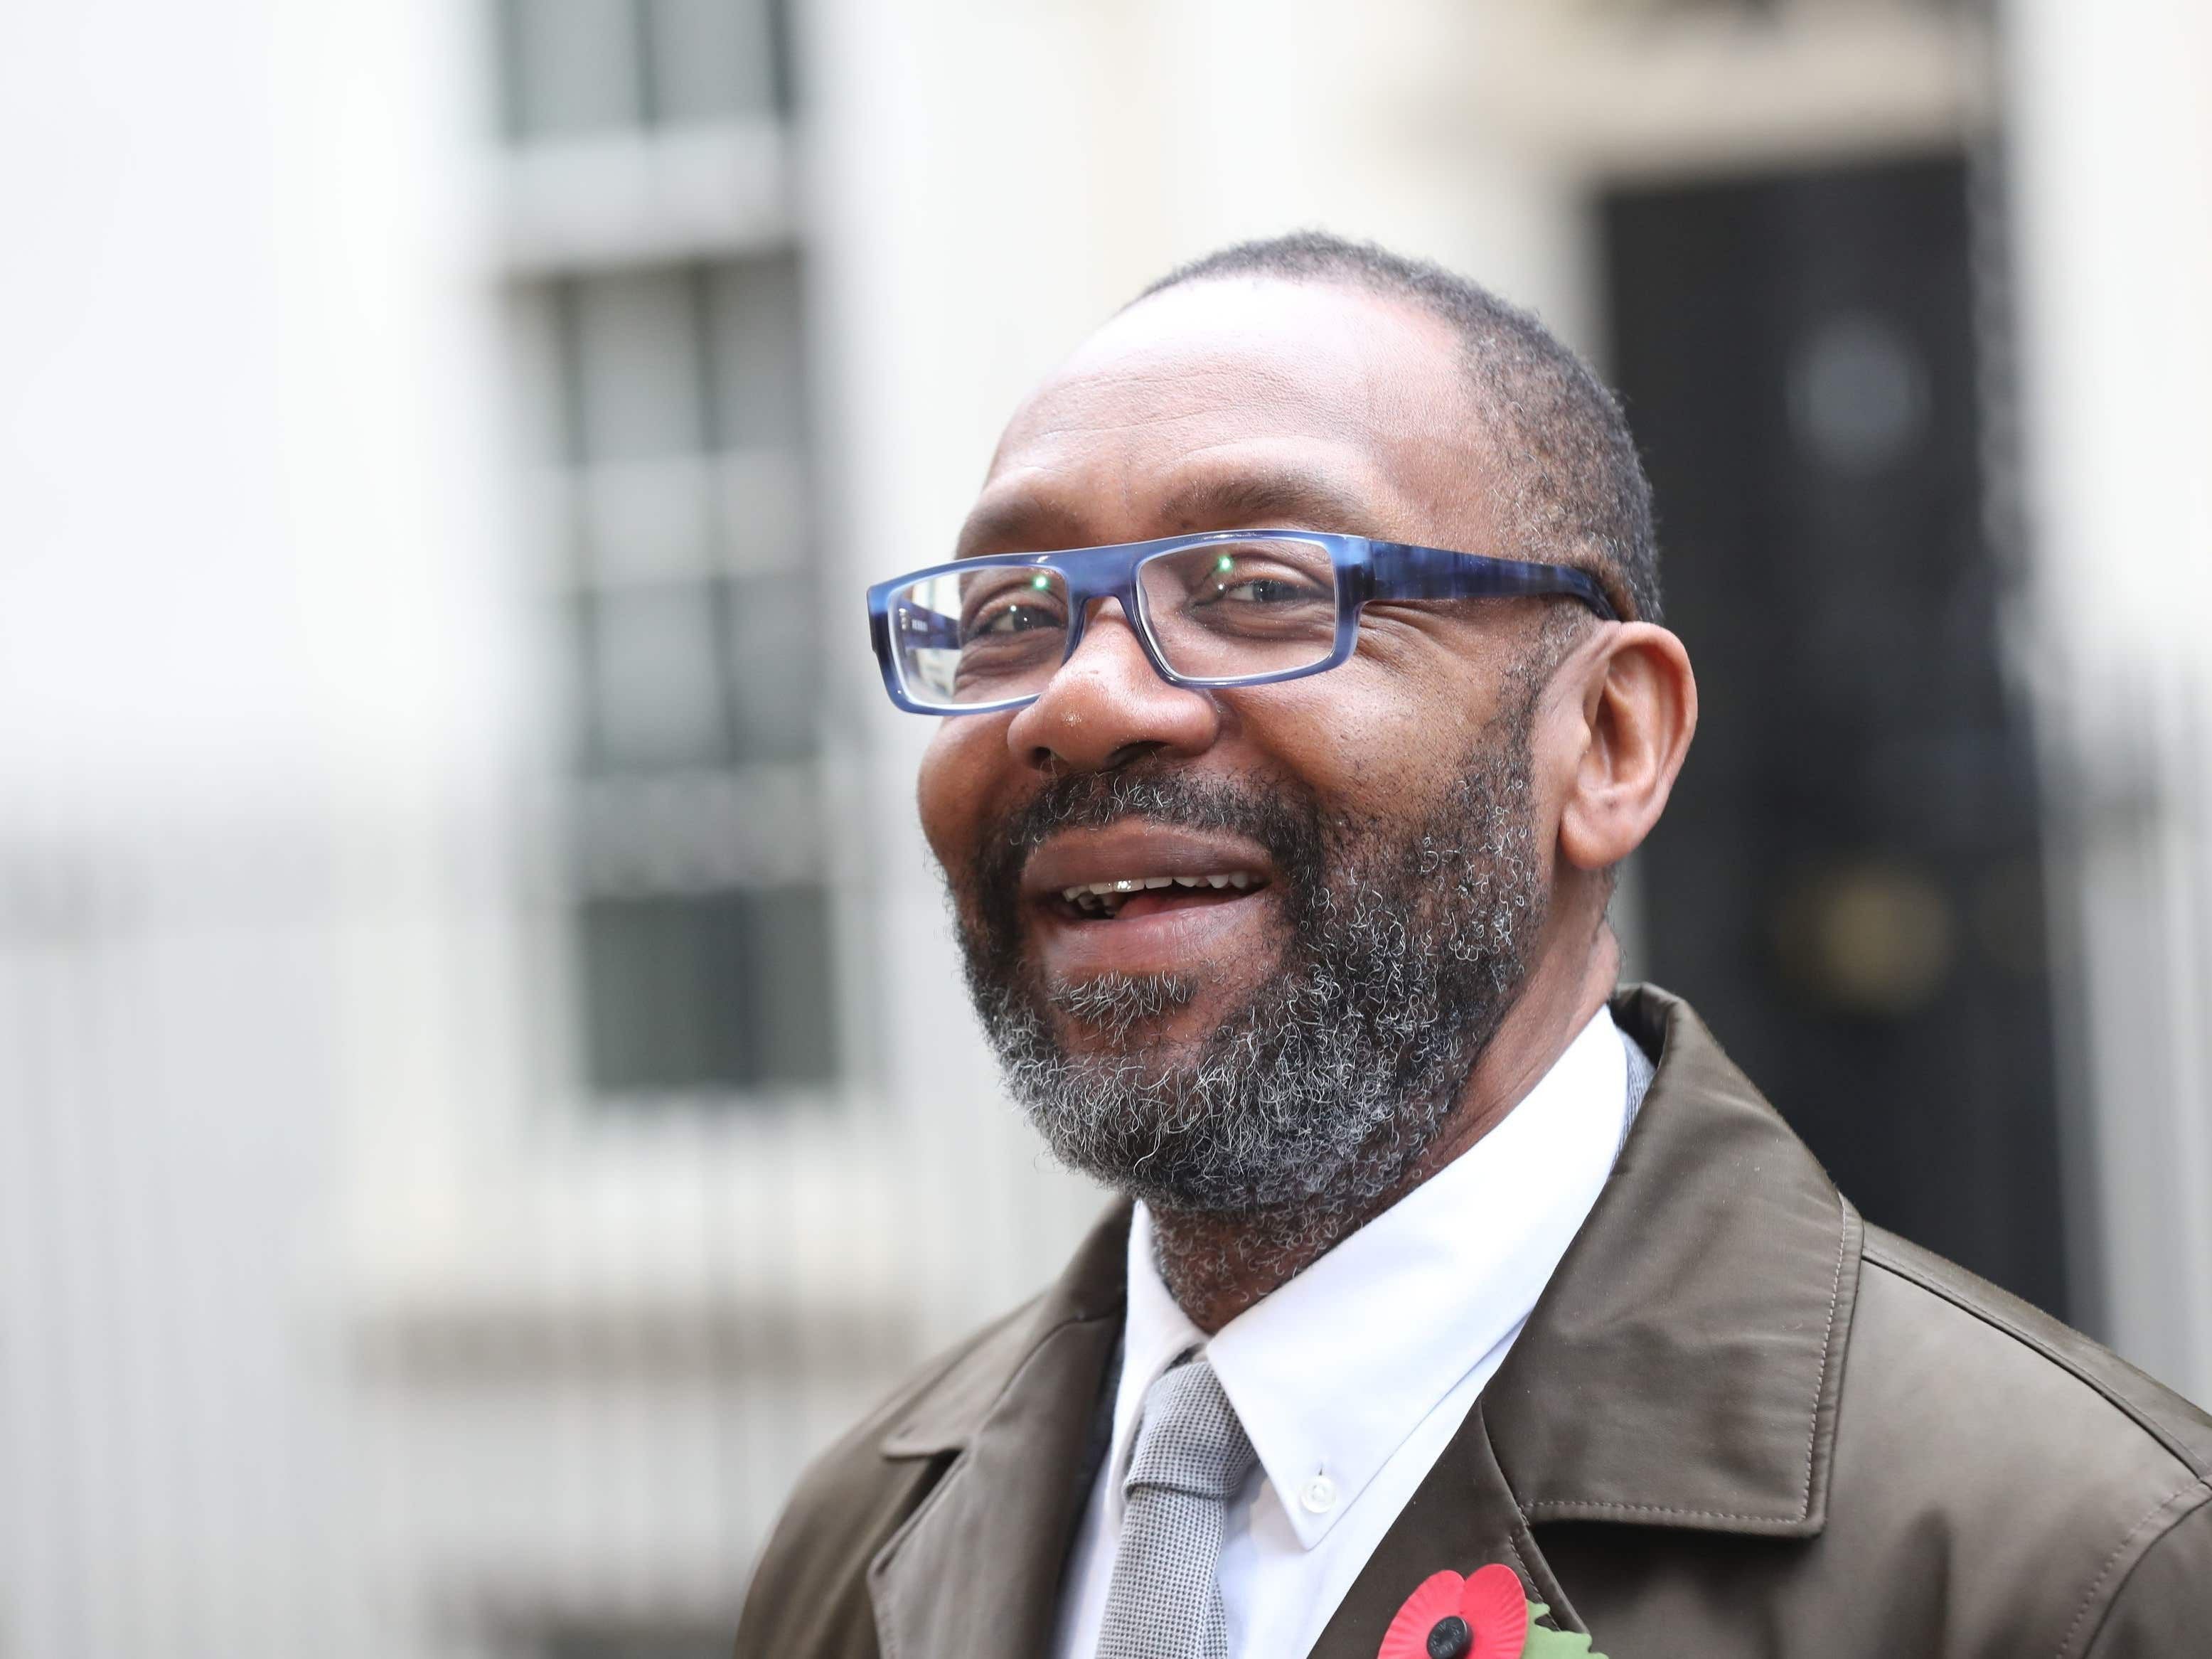 Lenny Henry supports letter calling Voter ID laws ‘attack on rights’